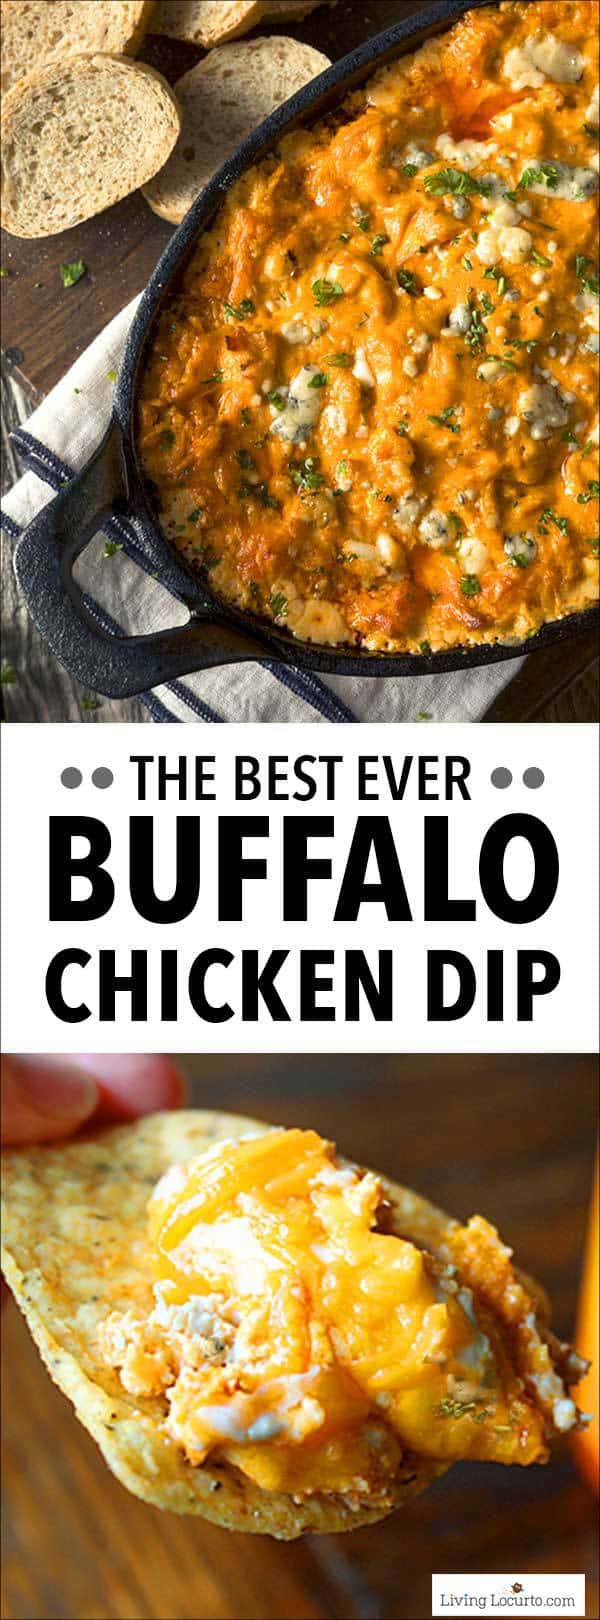 Buffalo Chicken Dip is a creamy hot wings and cheese dip recipe packed full flavor! Serve this appetizer recipe at any party and watch it disappear like magic!